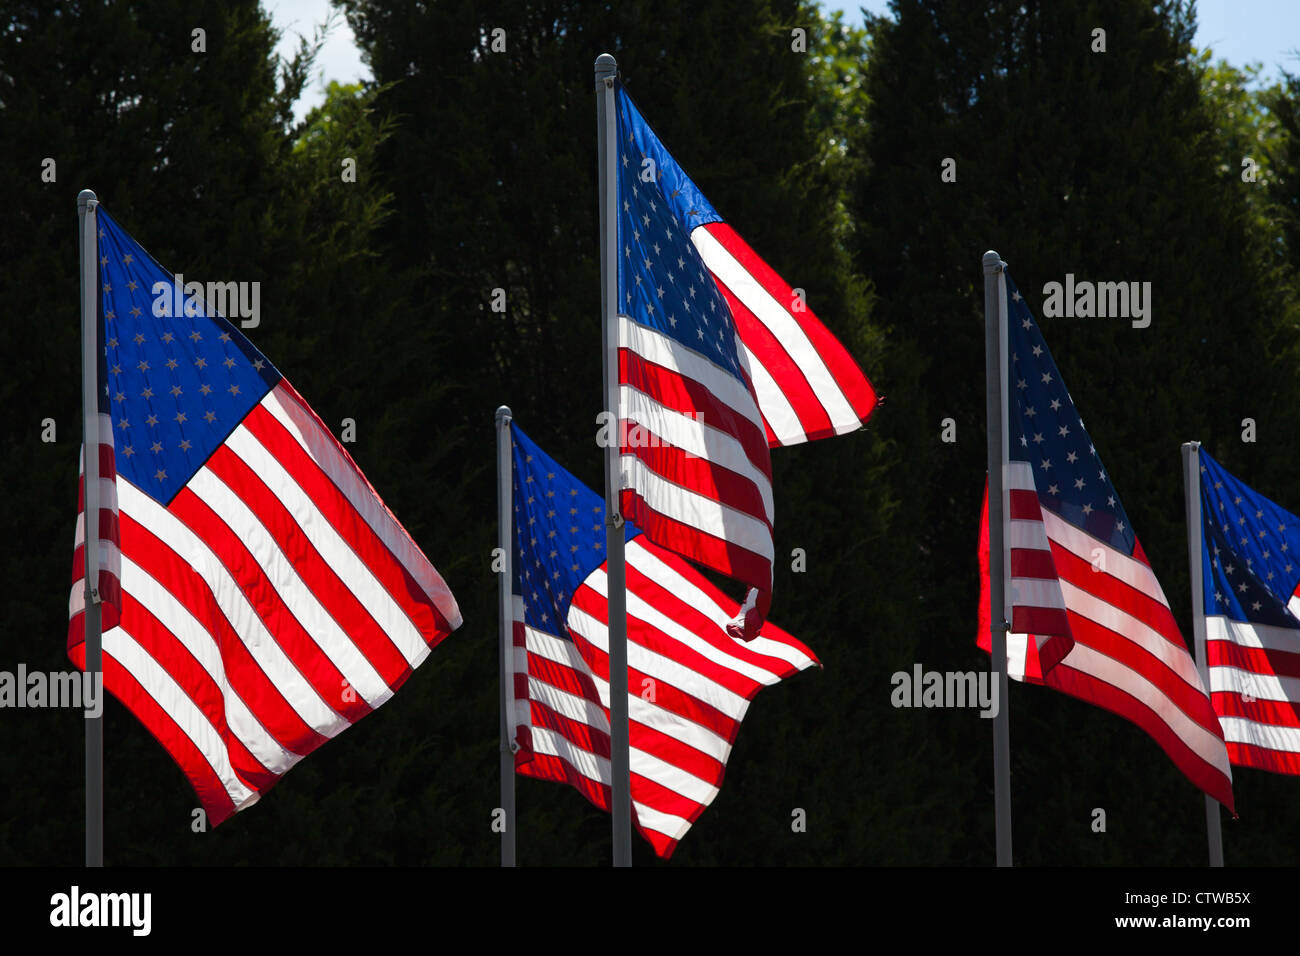 American flags in the wind on a sunny day Stock Photo